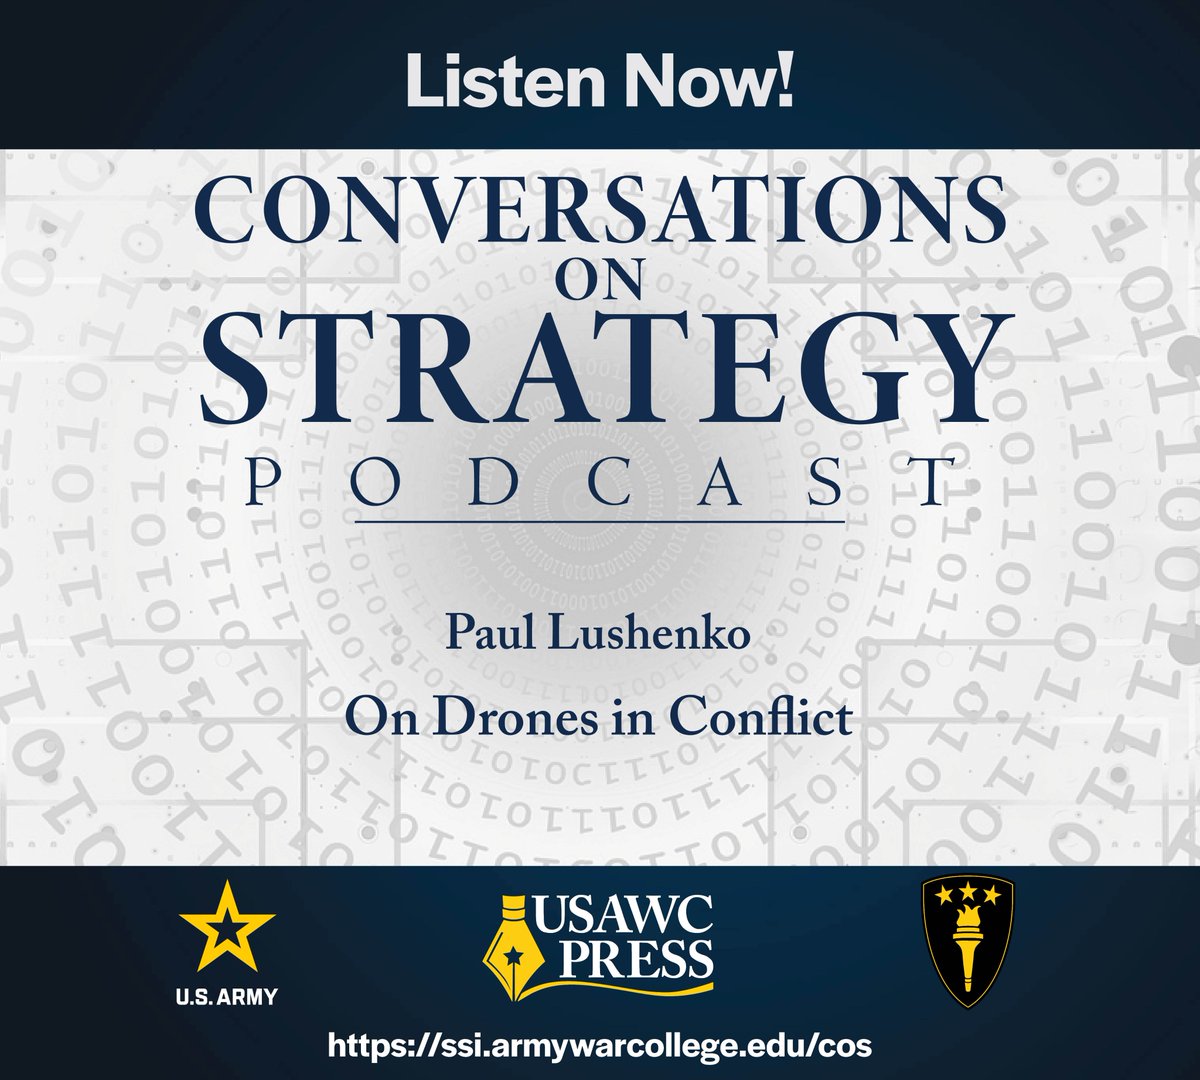 Did you miss @LushenkoPaul's podcast on drones in conflict? You can listen to it here: ssi.armywarcollege.edu/SSI-Media/Podc…